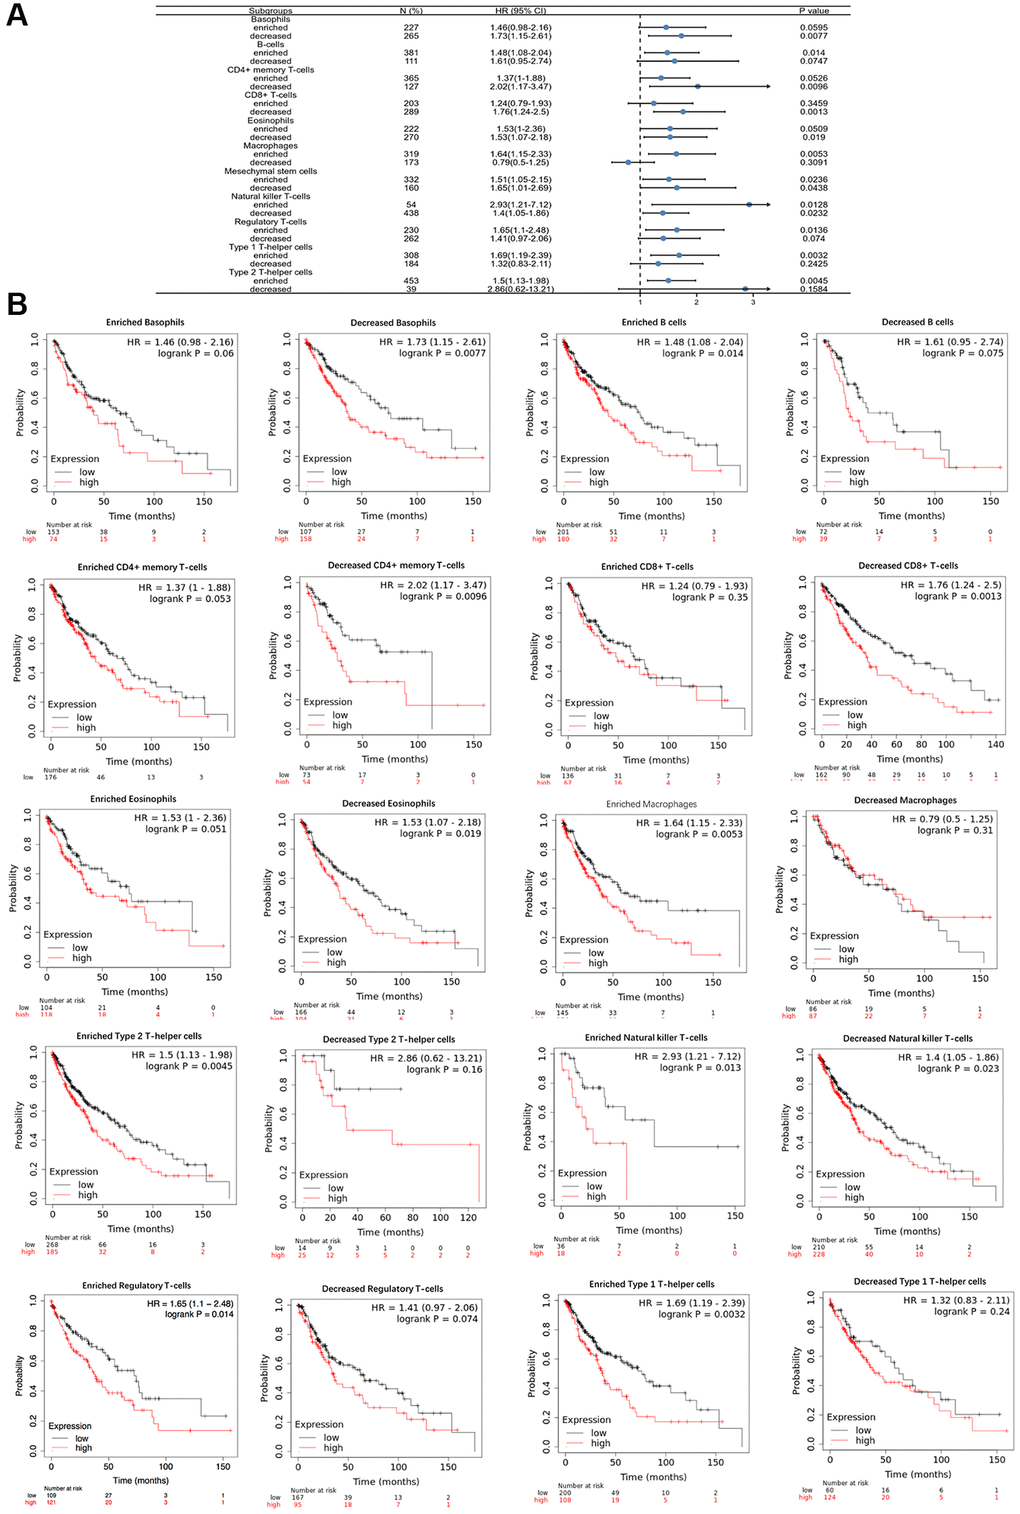 Comparison of Kaplan-Meier survival curves of the high and low expression of POSTN in immune cell subgroups in LUSC. A forest plot shows the prognostic value of POSTN expression based on different immune cell subgroups in LUSC (A). Correlations between the expression of POSTN and OS based on different immune cell subgroups in LUSC (B).